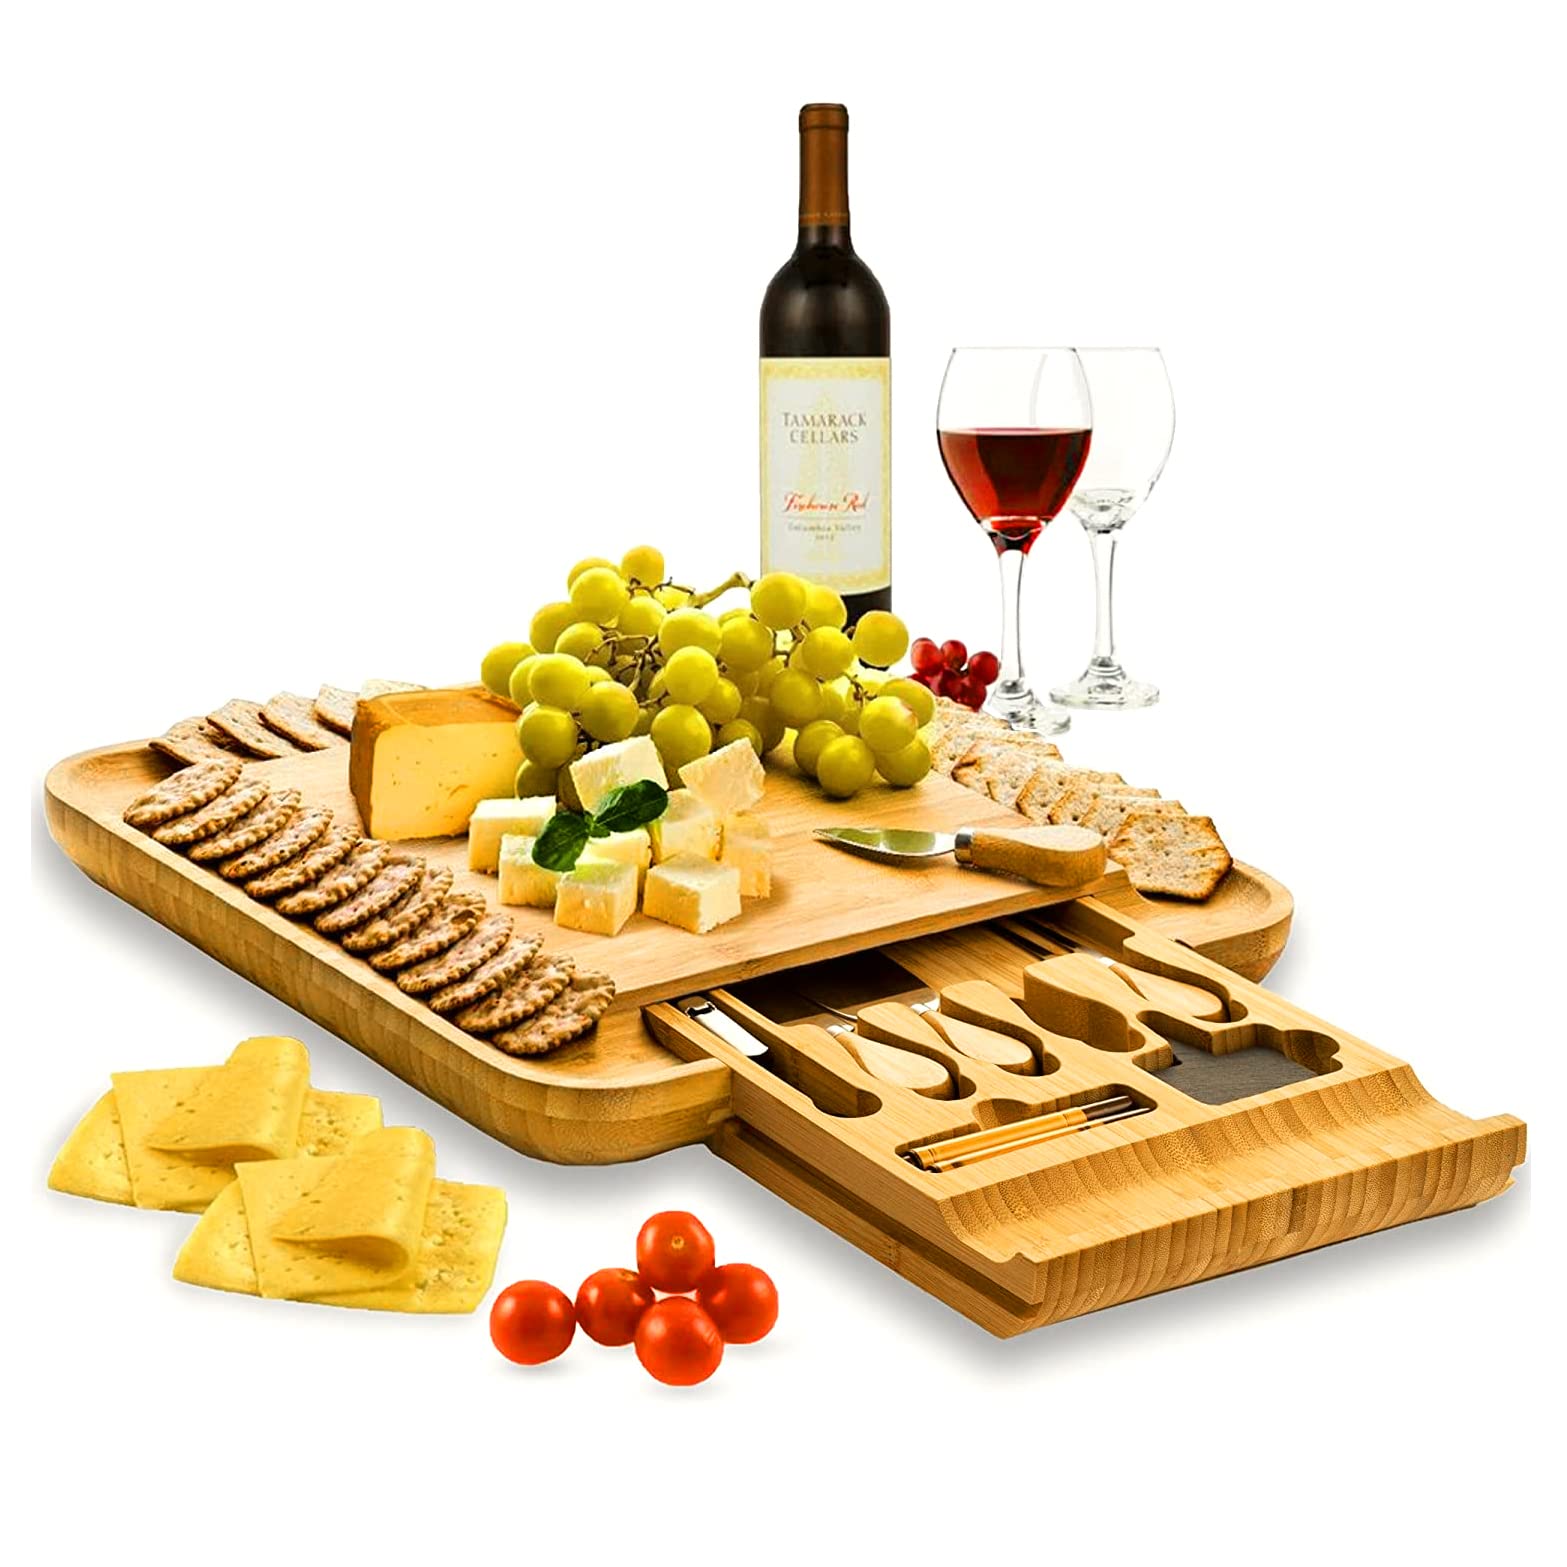 Bambüsi Charcuterie Boards Gift Set - Bamboo Cheese Board Set, Charcuterie Boards Accessories with Serving Knife - Unique Birthday Gifts for Women - Perfect Housewarming, Wedding Gifts for Couple